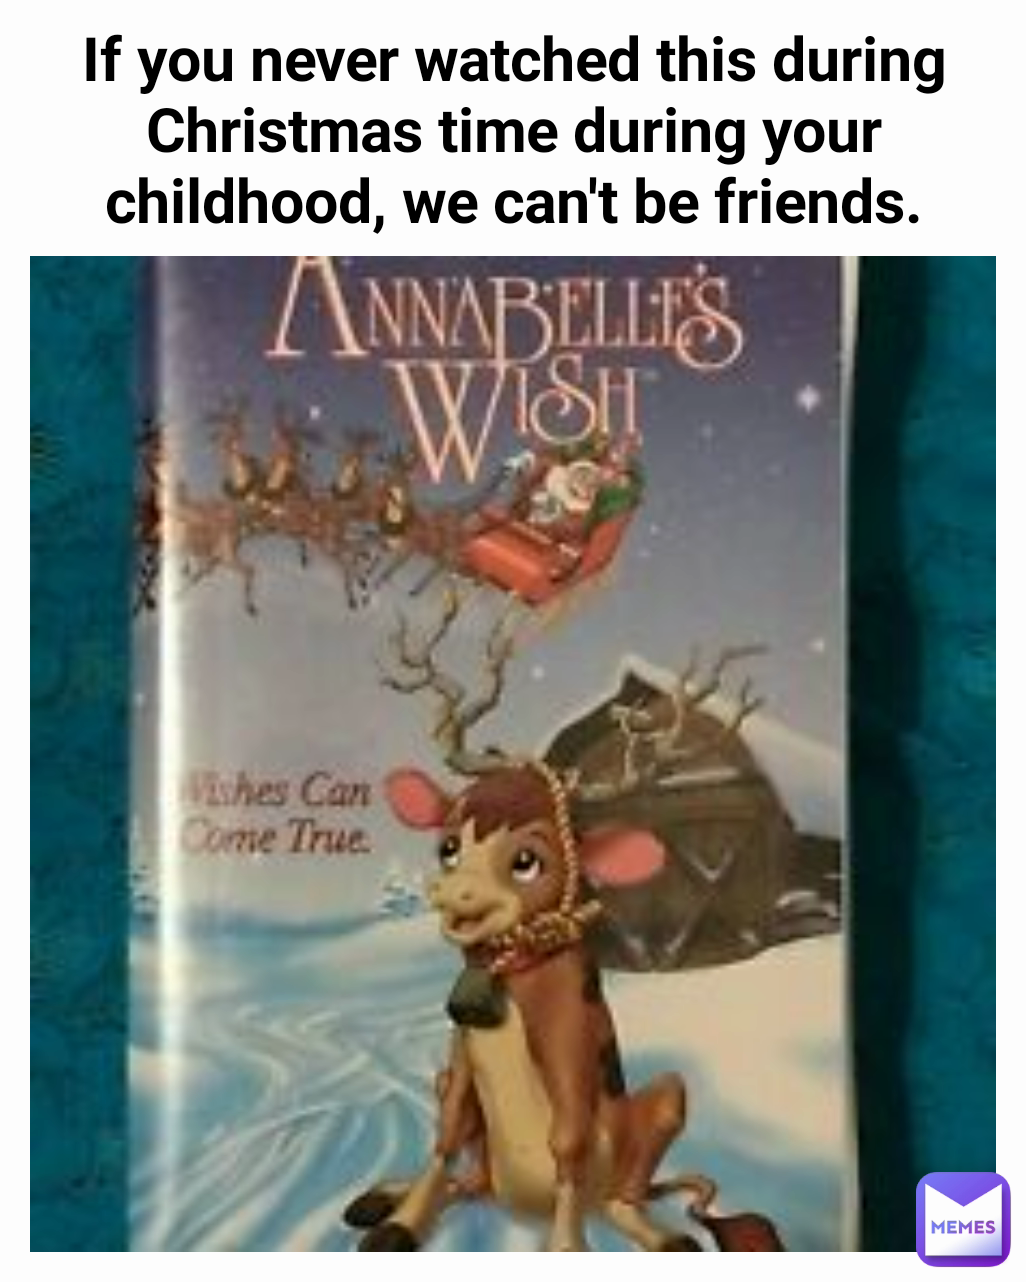 If you never watched this during Christmas time during your childhood, we can't be friends.